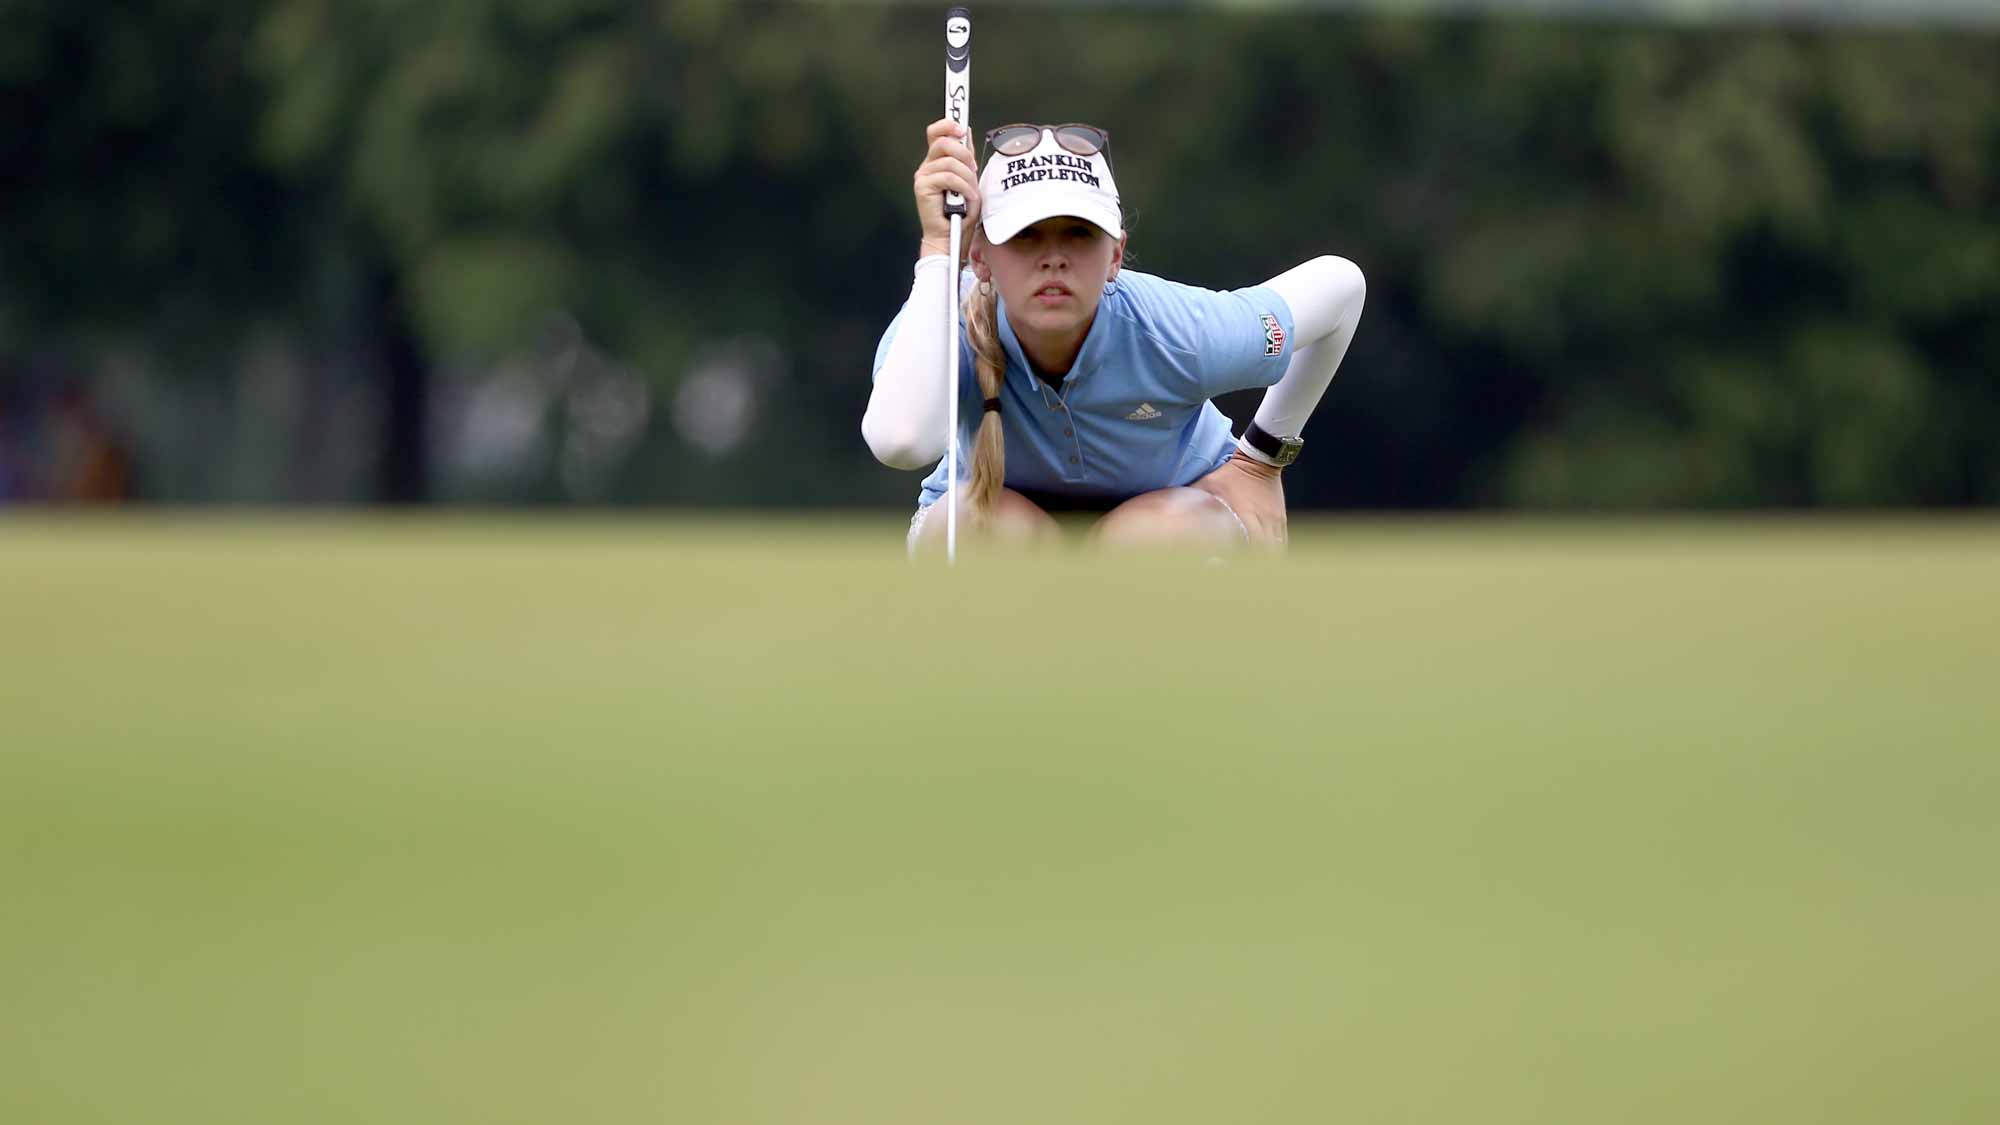 Jessica Korda of USA lines for a putt on the 9th hole during the final round of the Sime Darby LPGA Tour at Kuala Lumpur Golf & Country Club